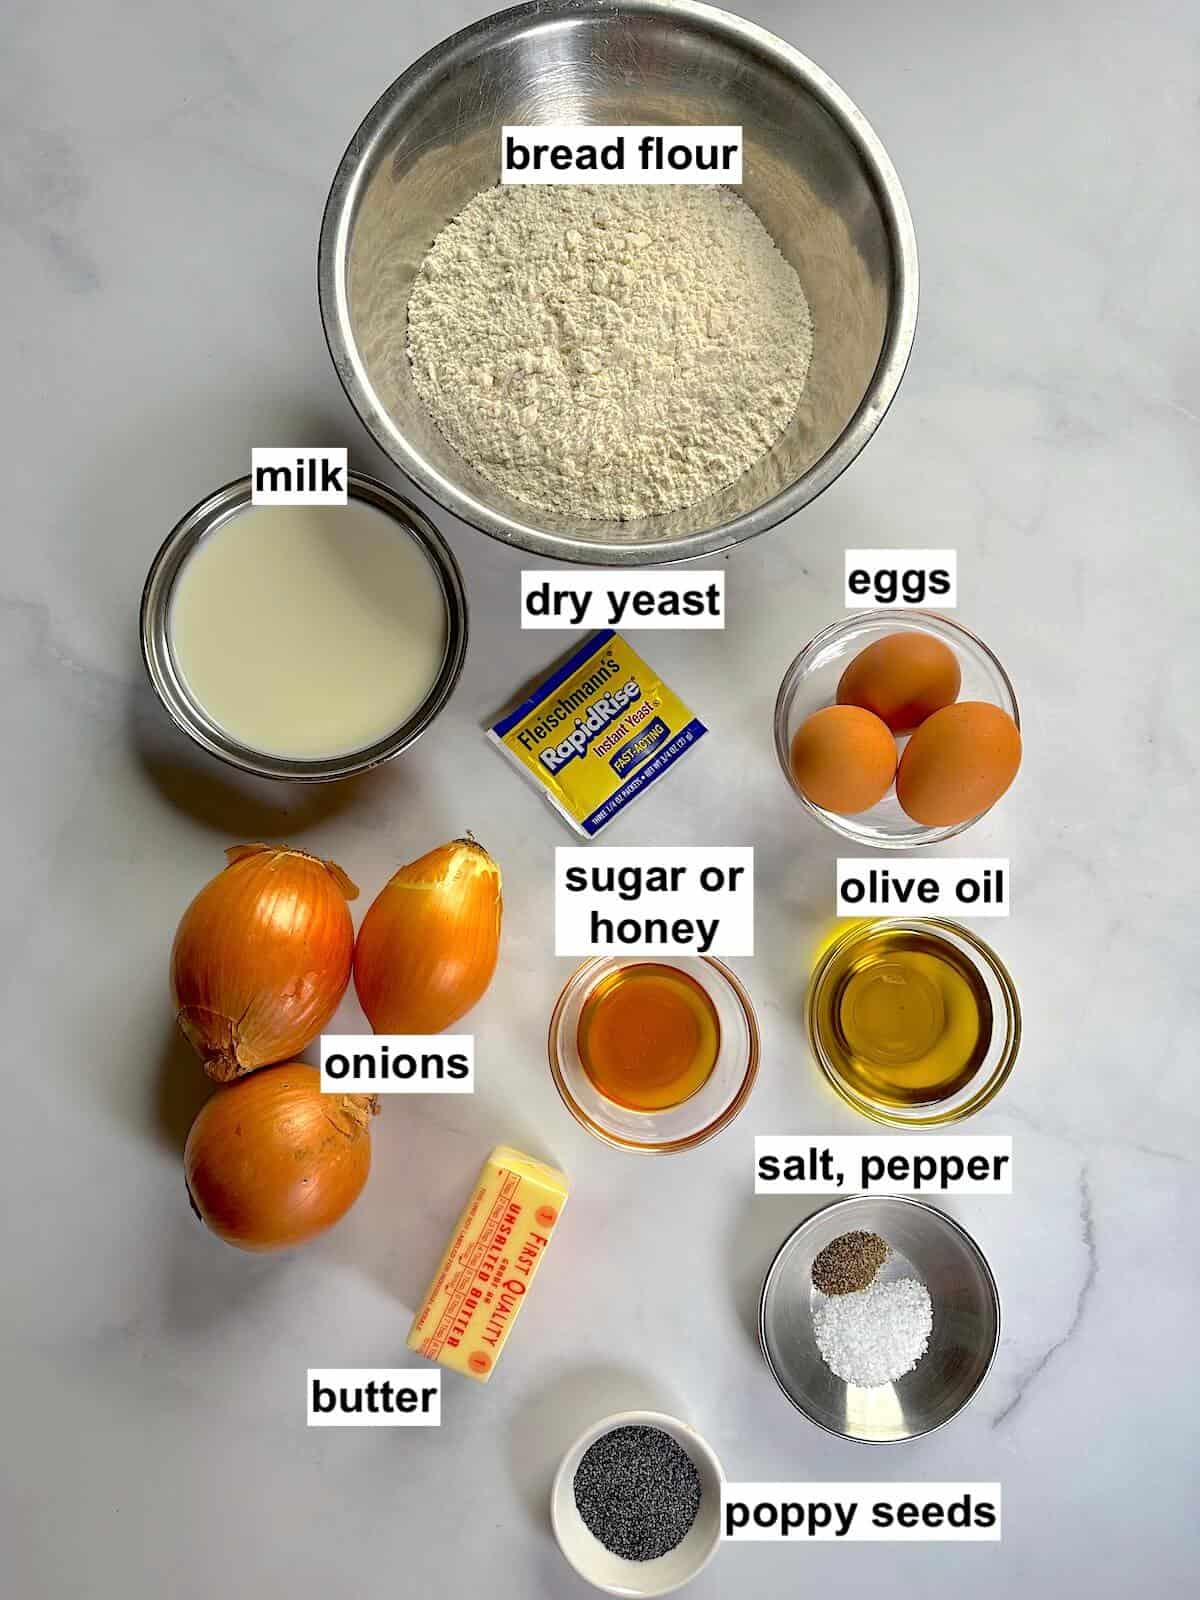 Ingredients needed for making the recipe.